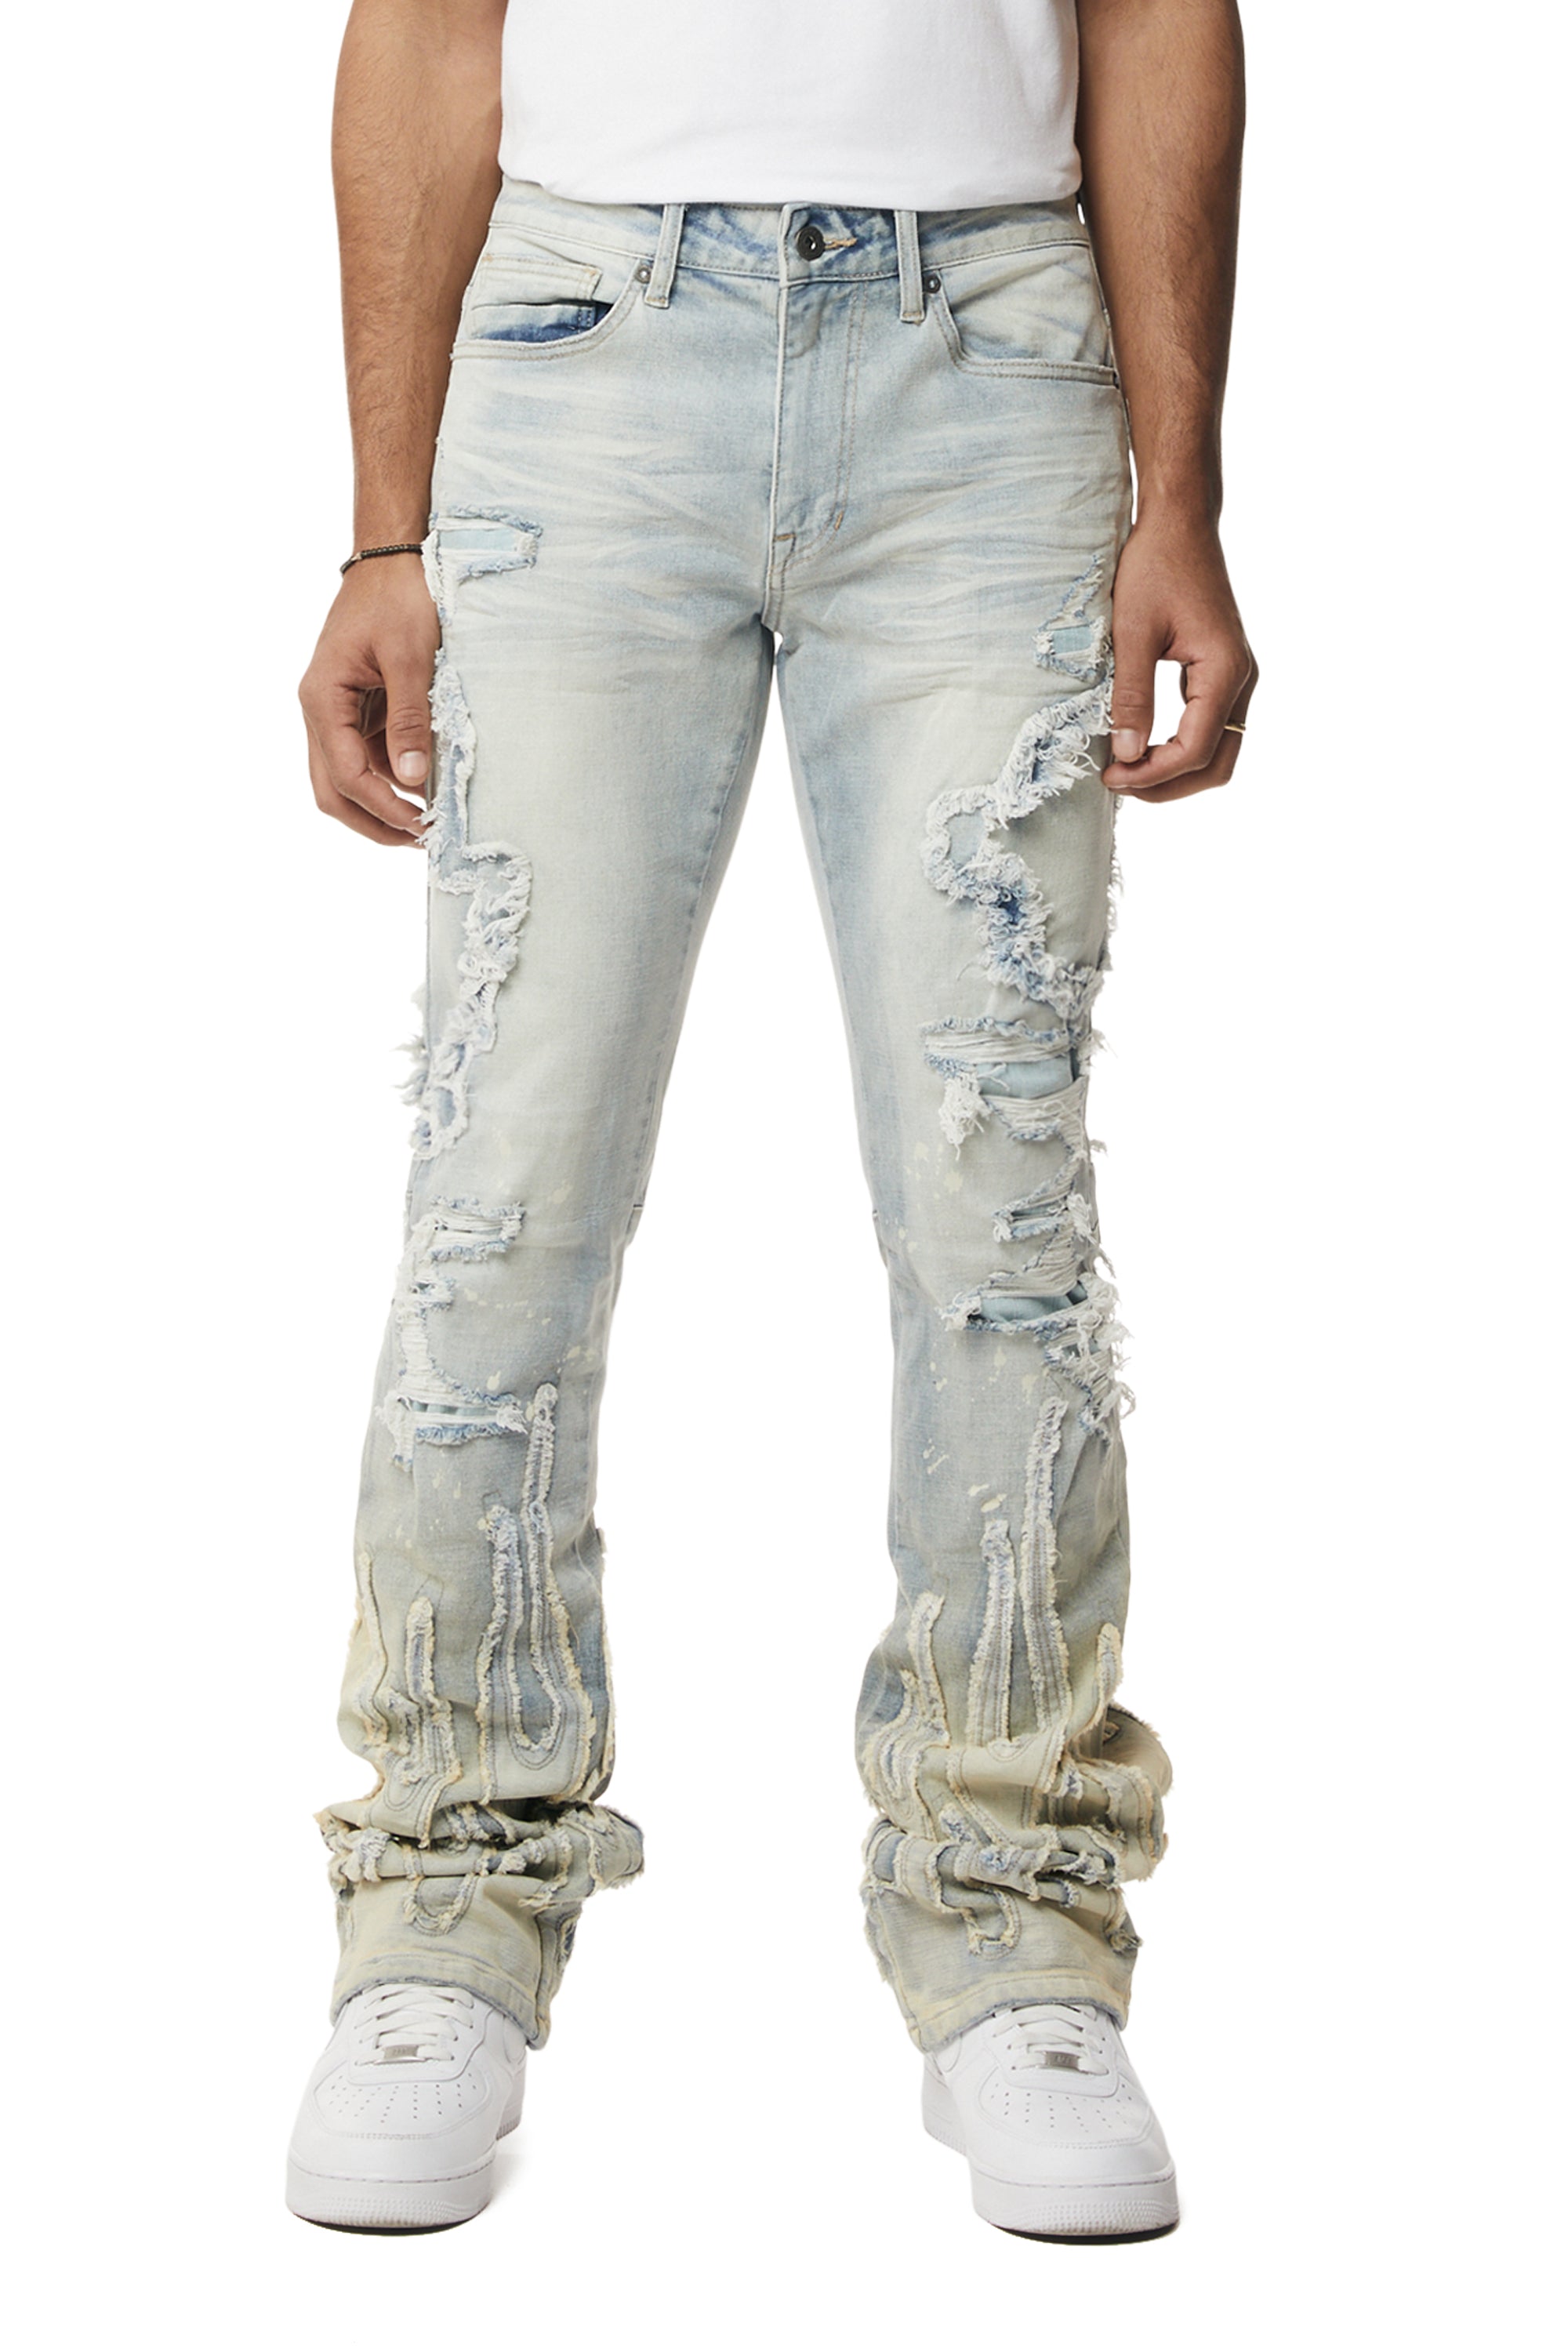 Flame Applique Heavy R&R Stacked Denim Jeans - Ombre Blue